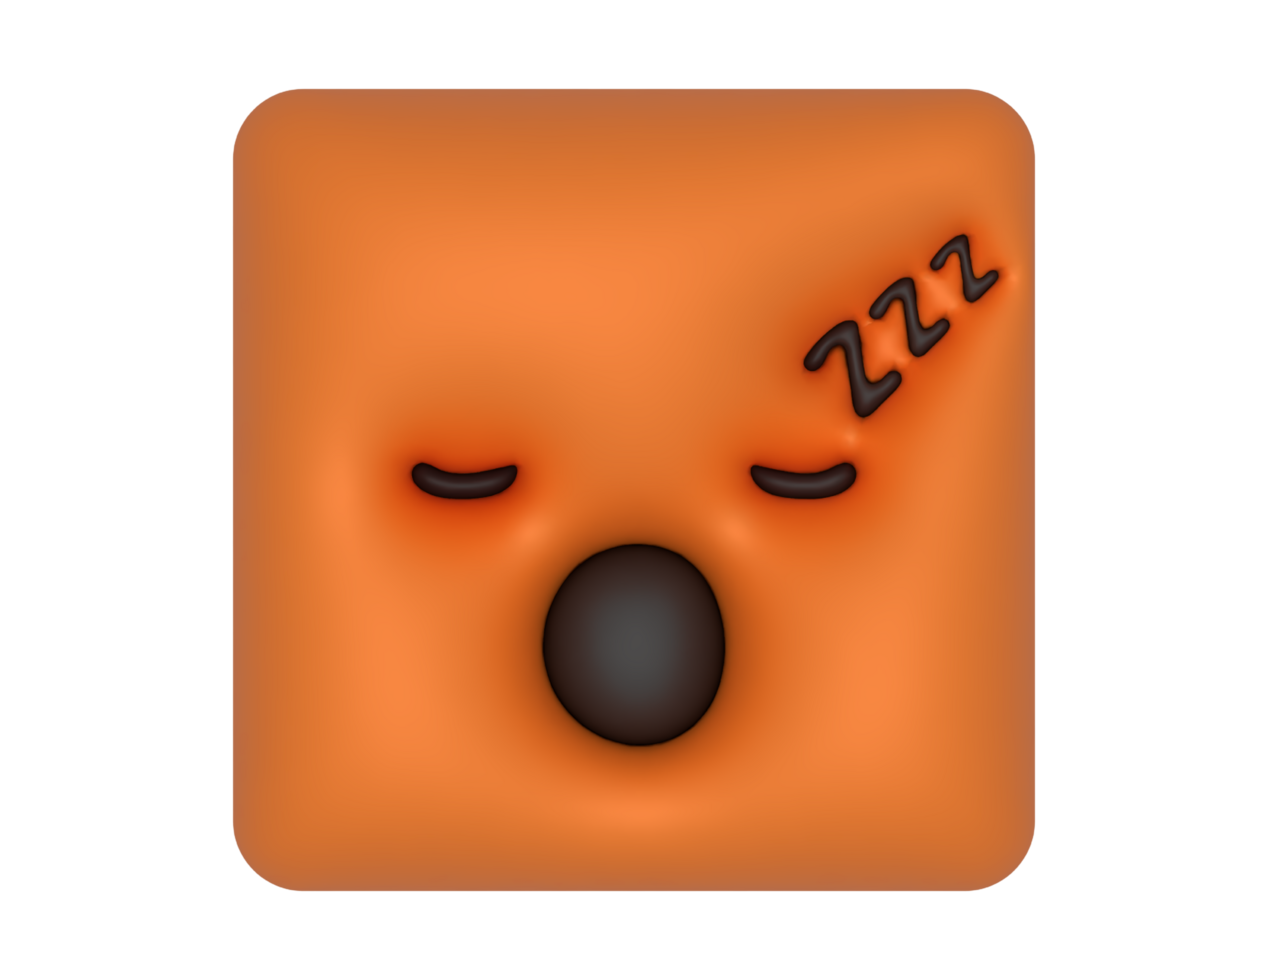 an orange square with a sleeping face png